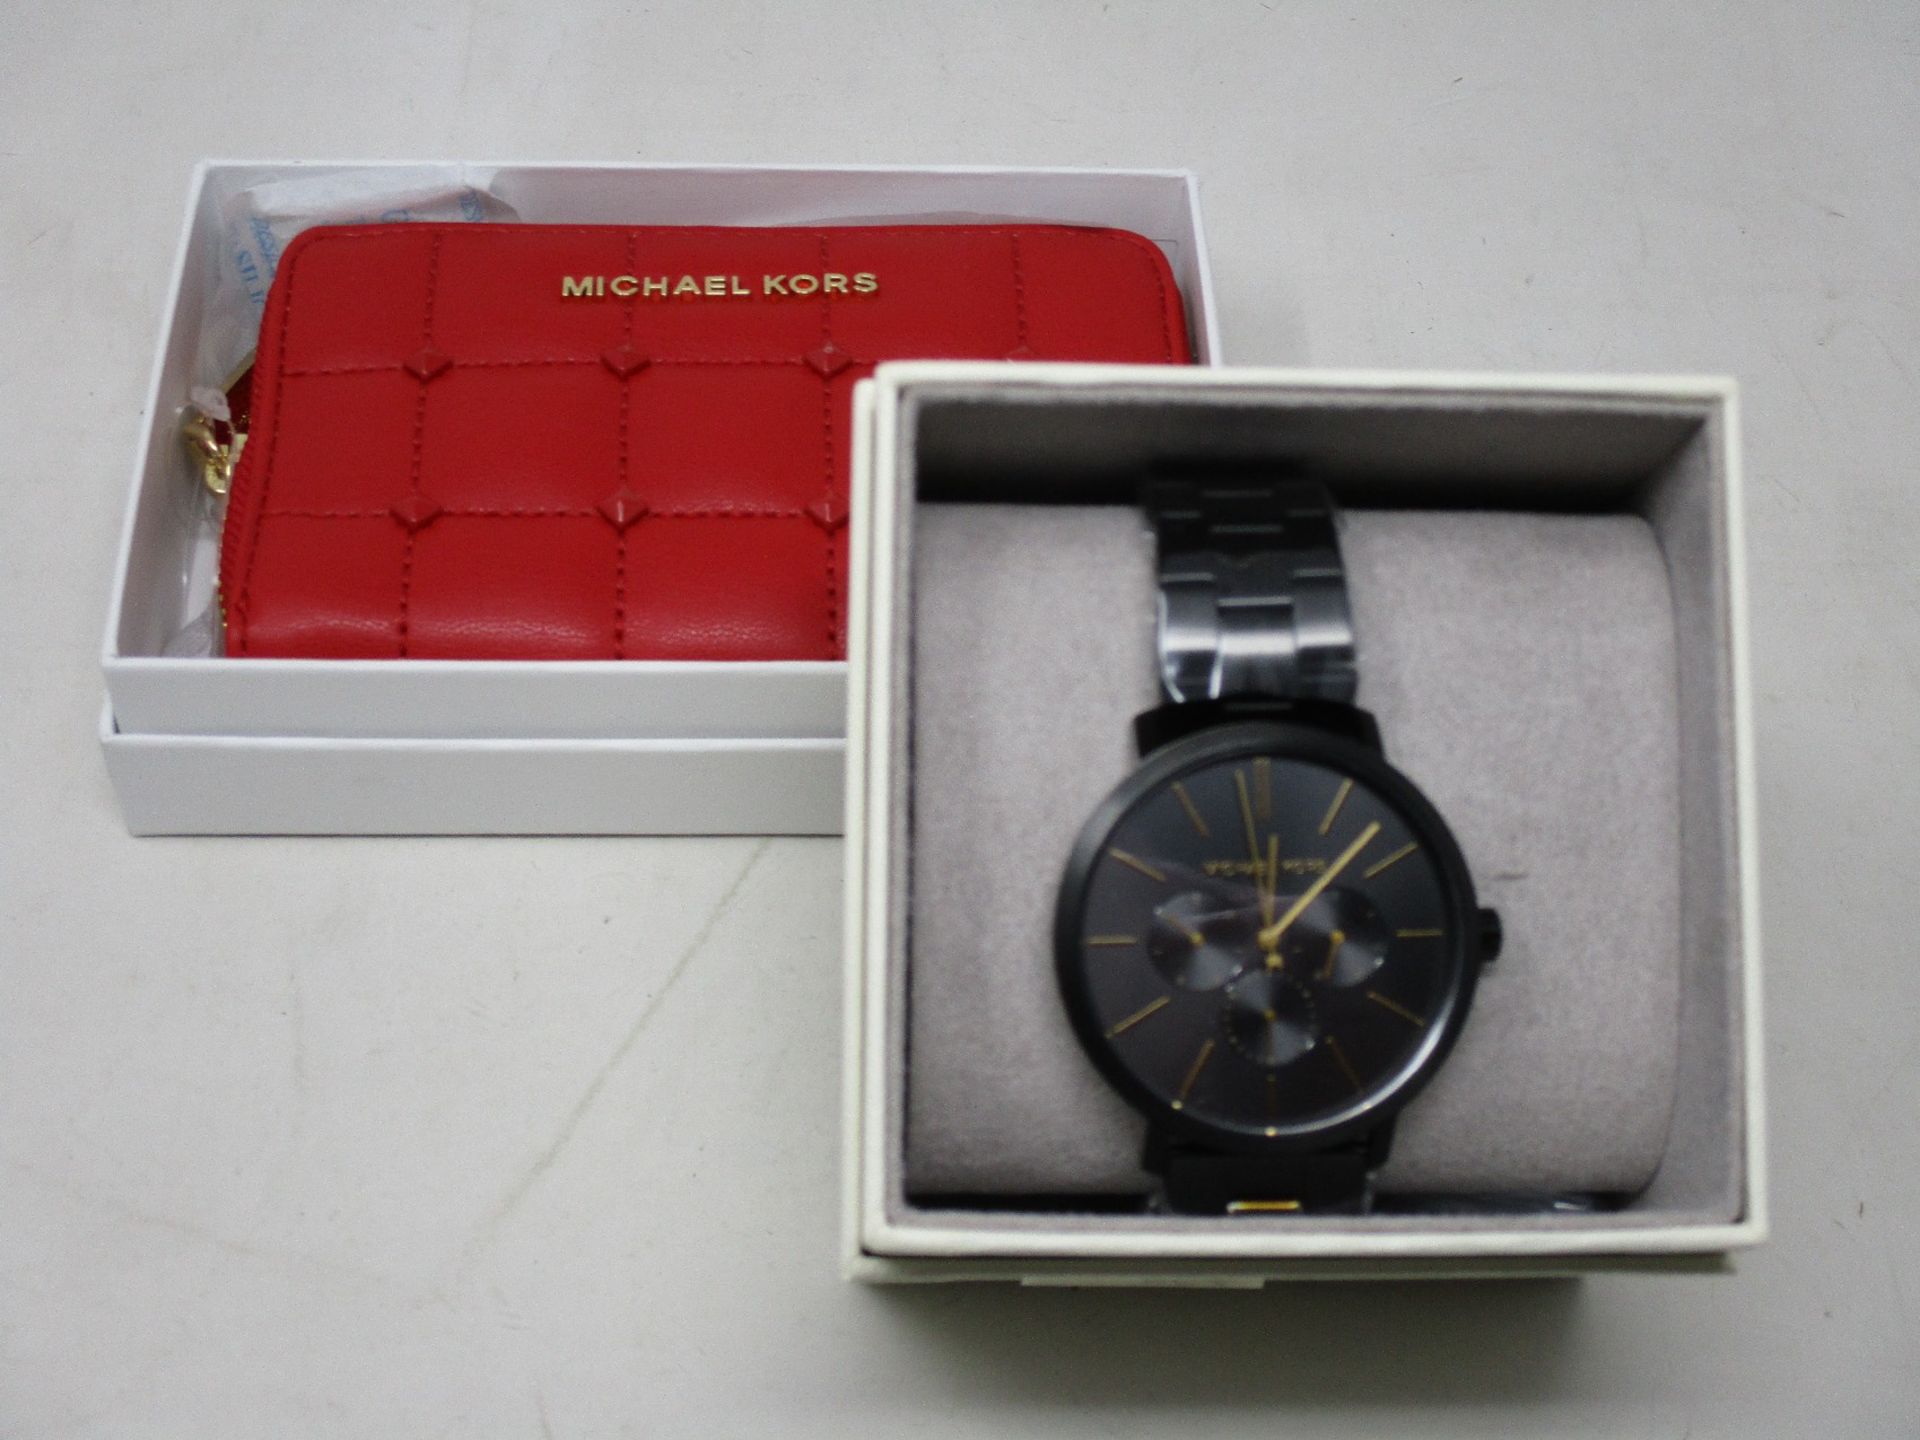 An as new Michael Kors MK8703 watch and a Jet Set purse in red.